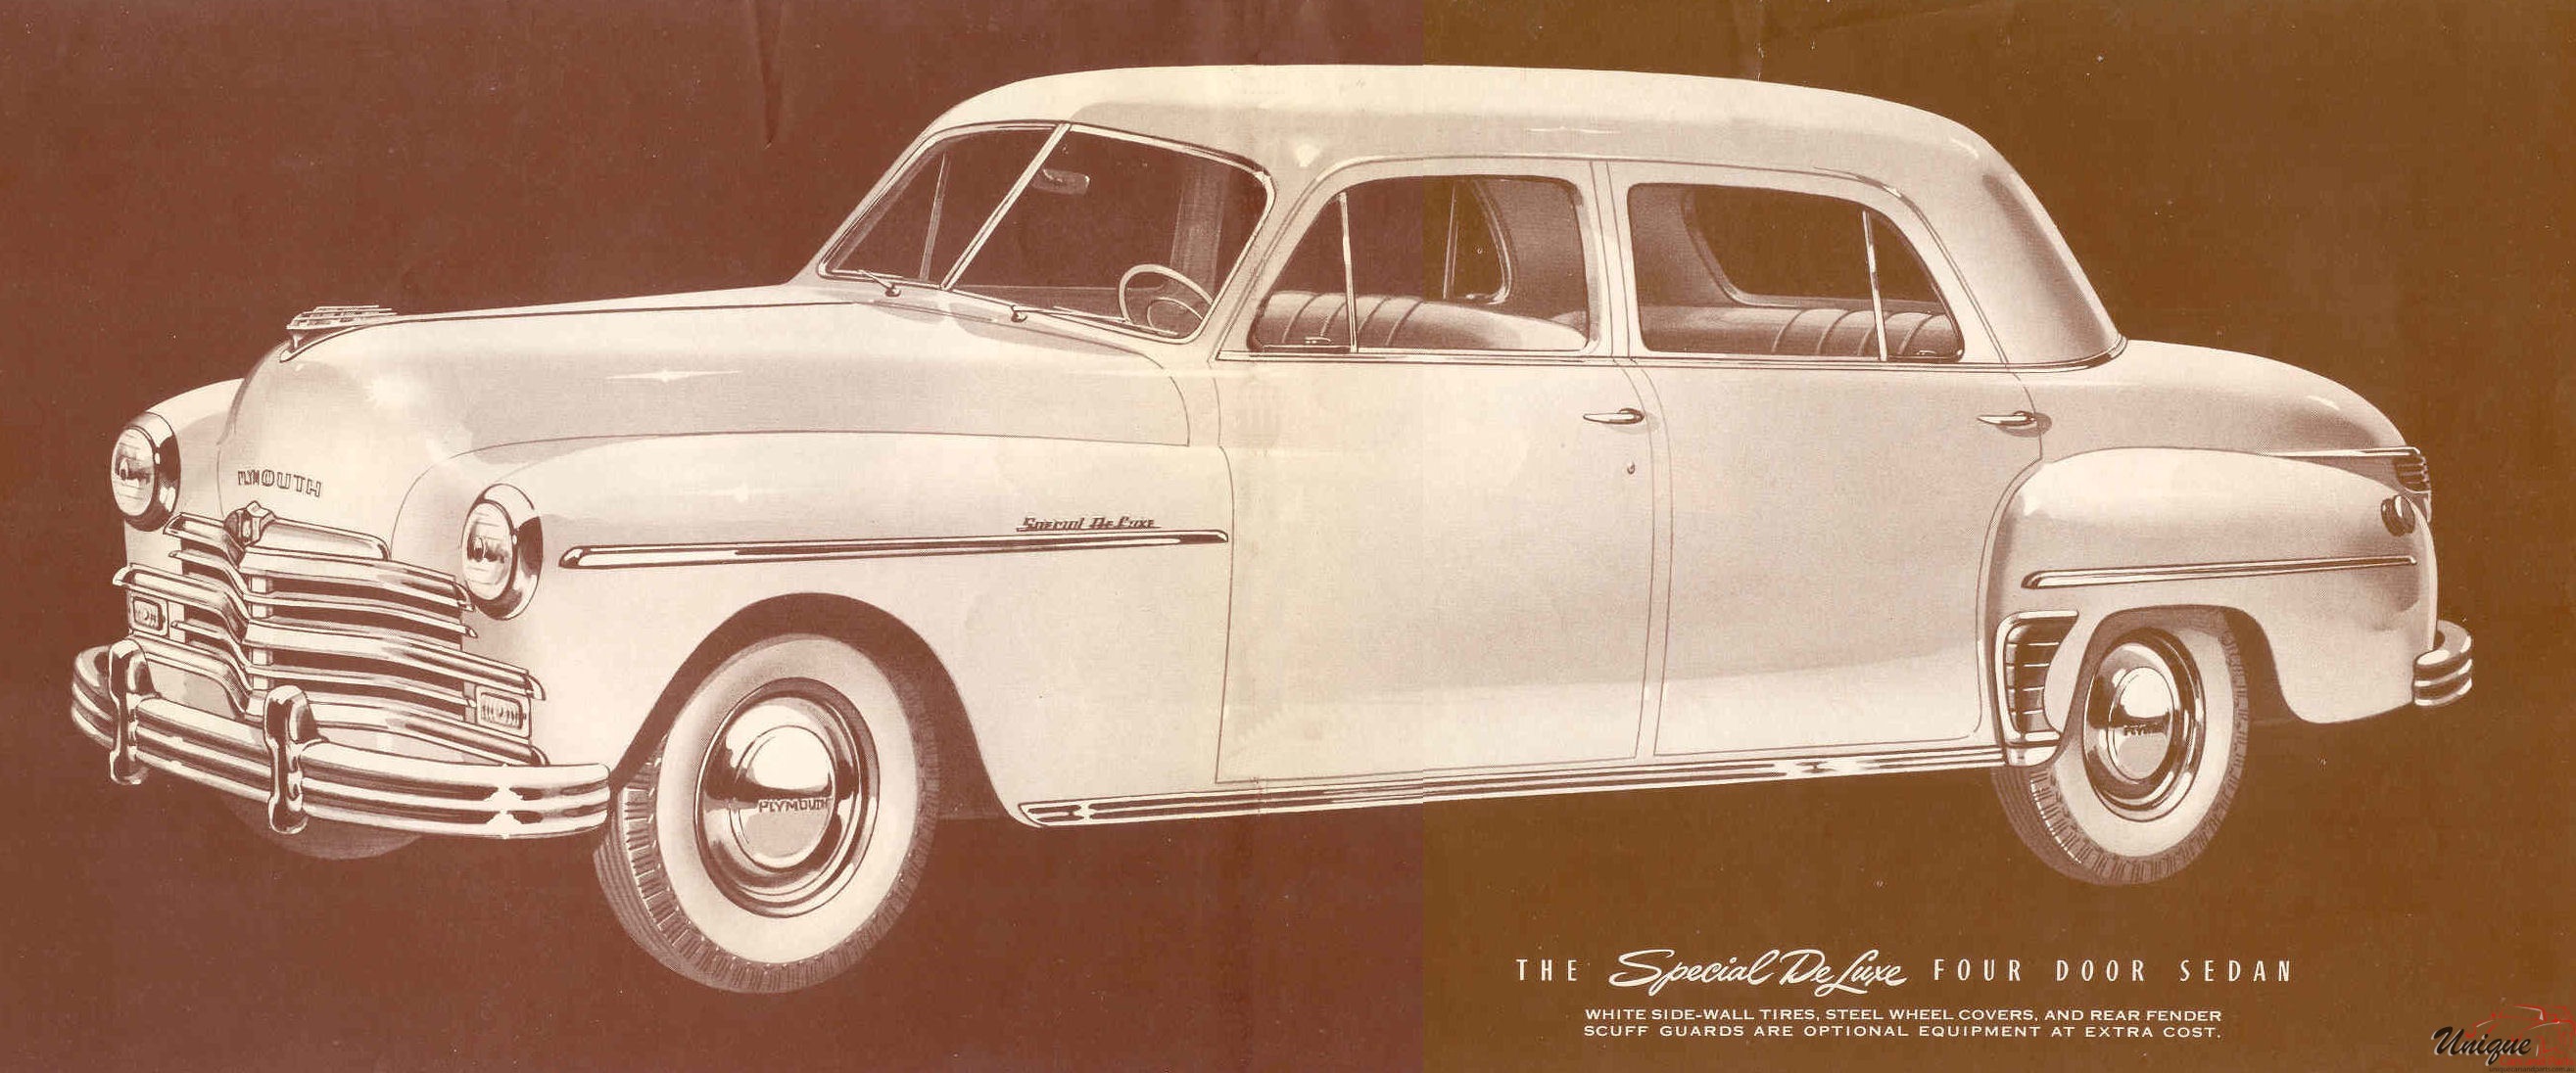 1949 Plymouth Brochure Page 2